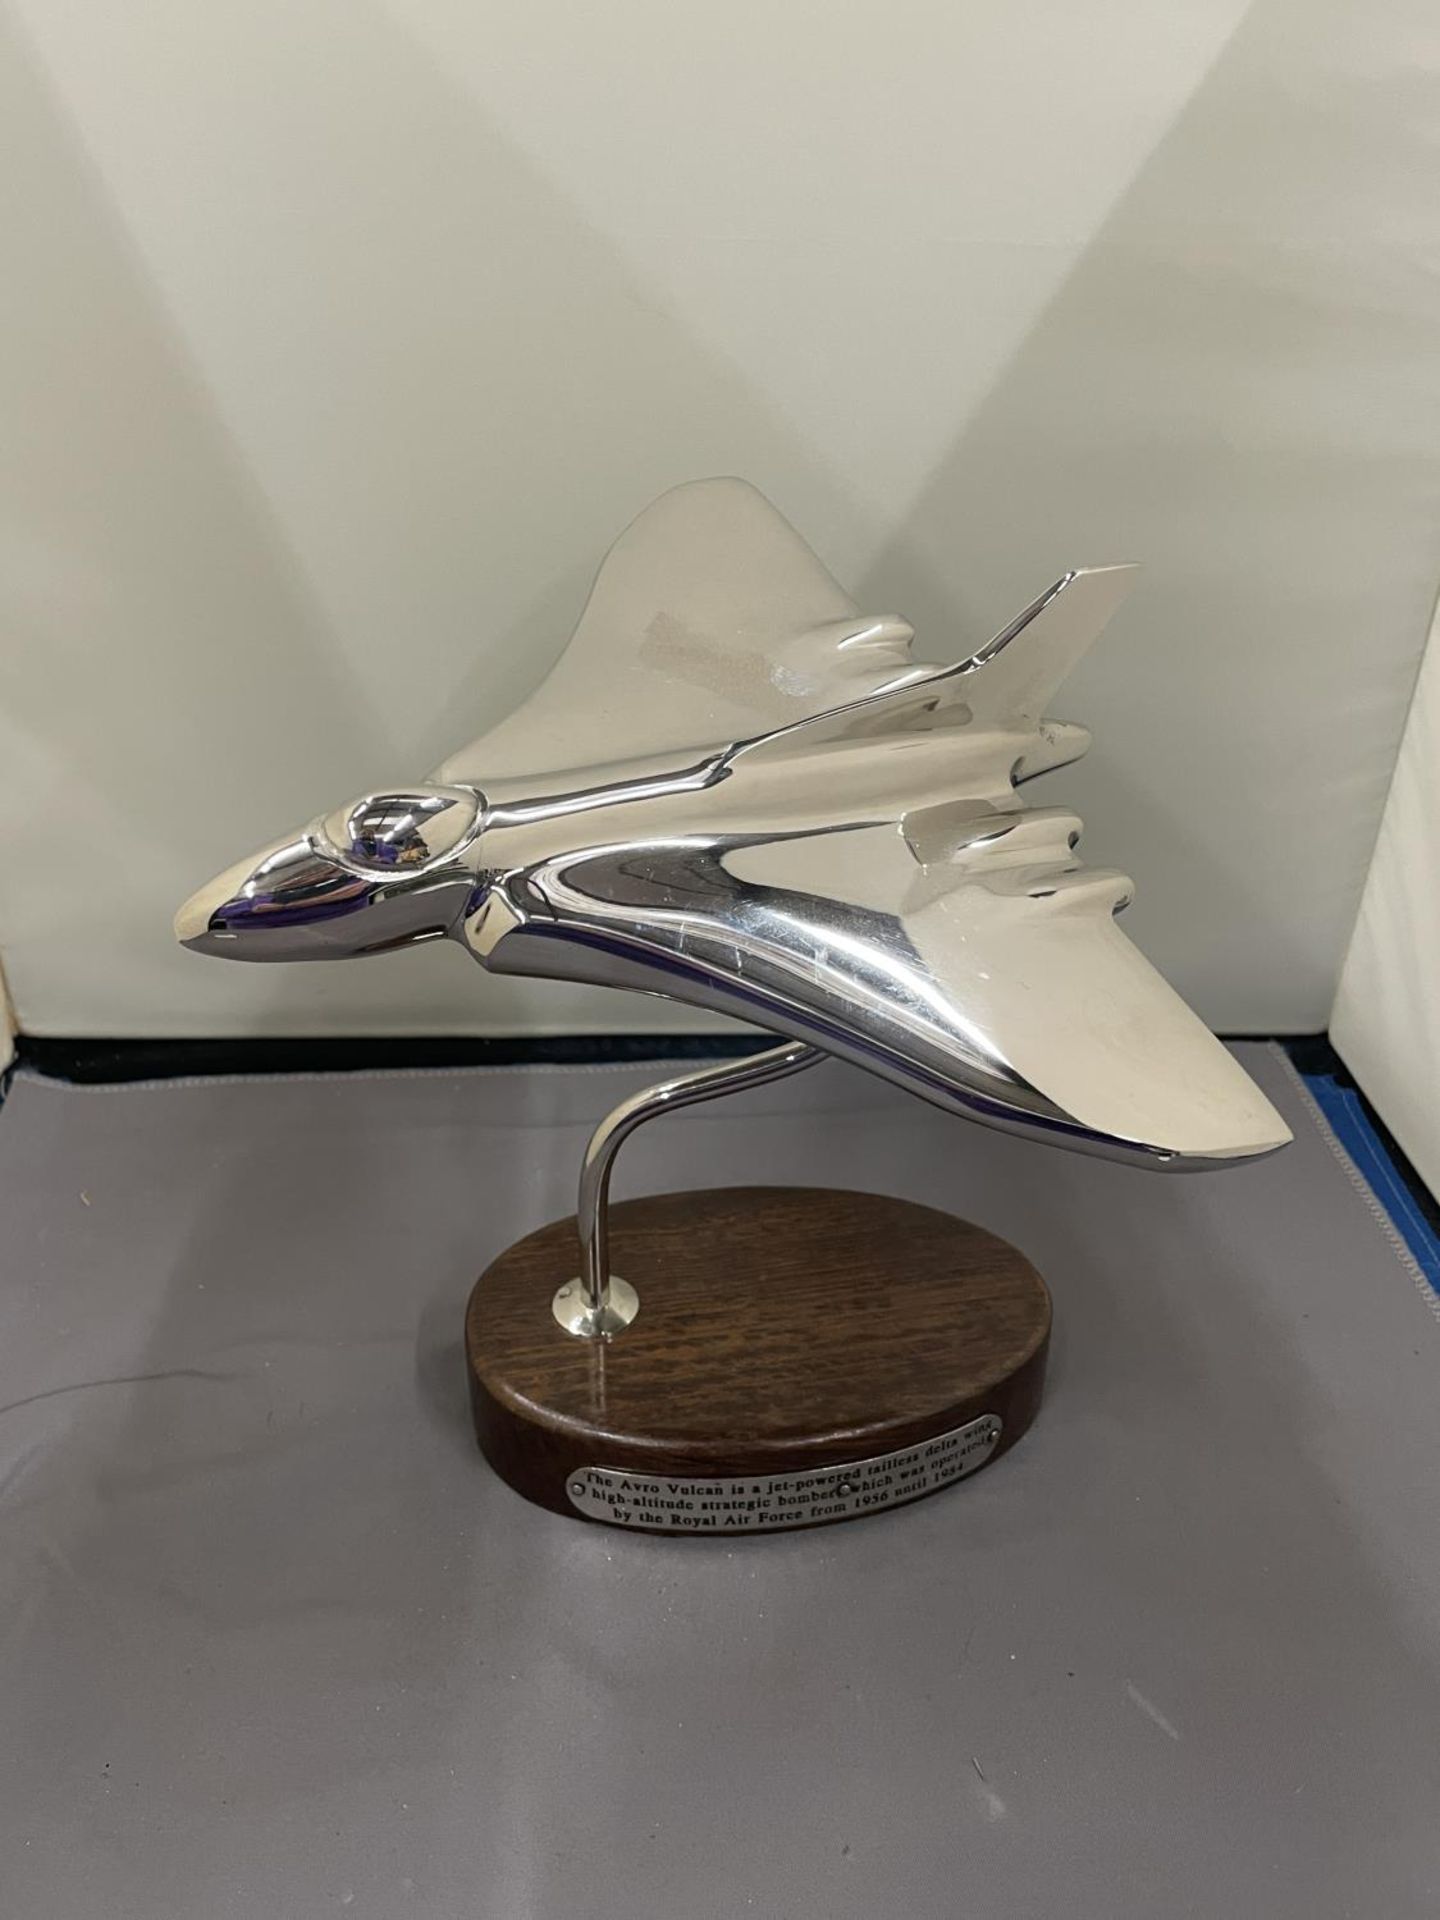 A CHROME VULCAN BOMBER ON A WOODEN BASE - Image 2 of 8